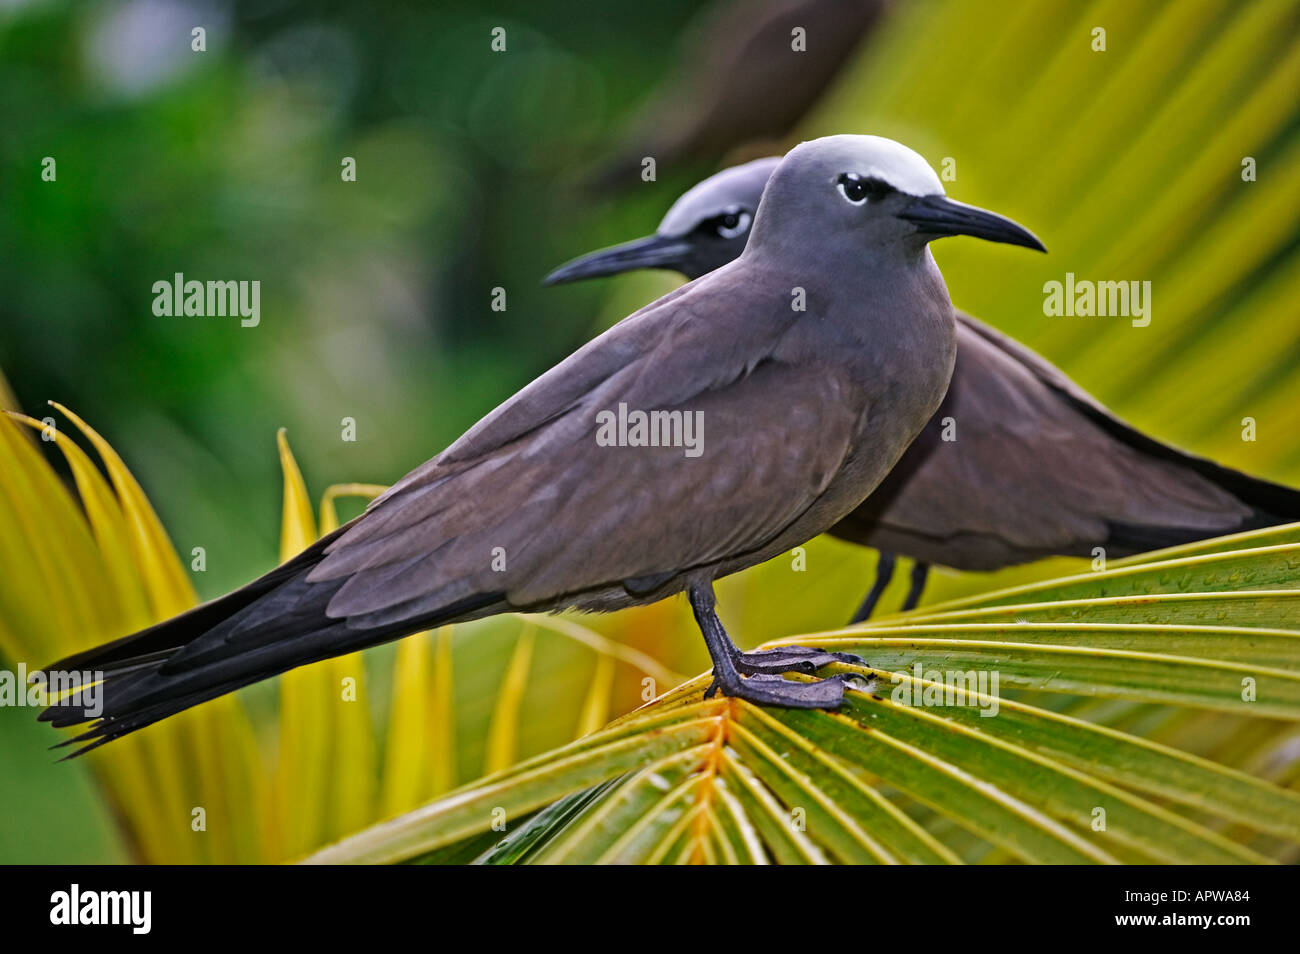 Common noddy tern Anous stolidus Seychelles Dist Tropical islands and oceans worldwide Stock Photo